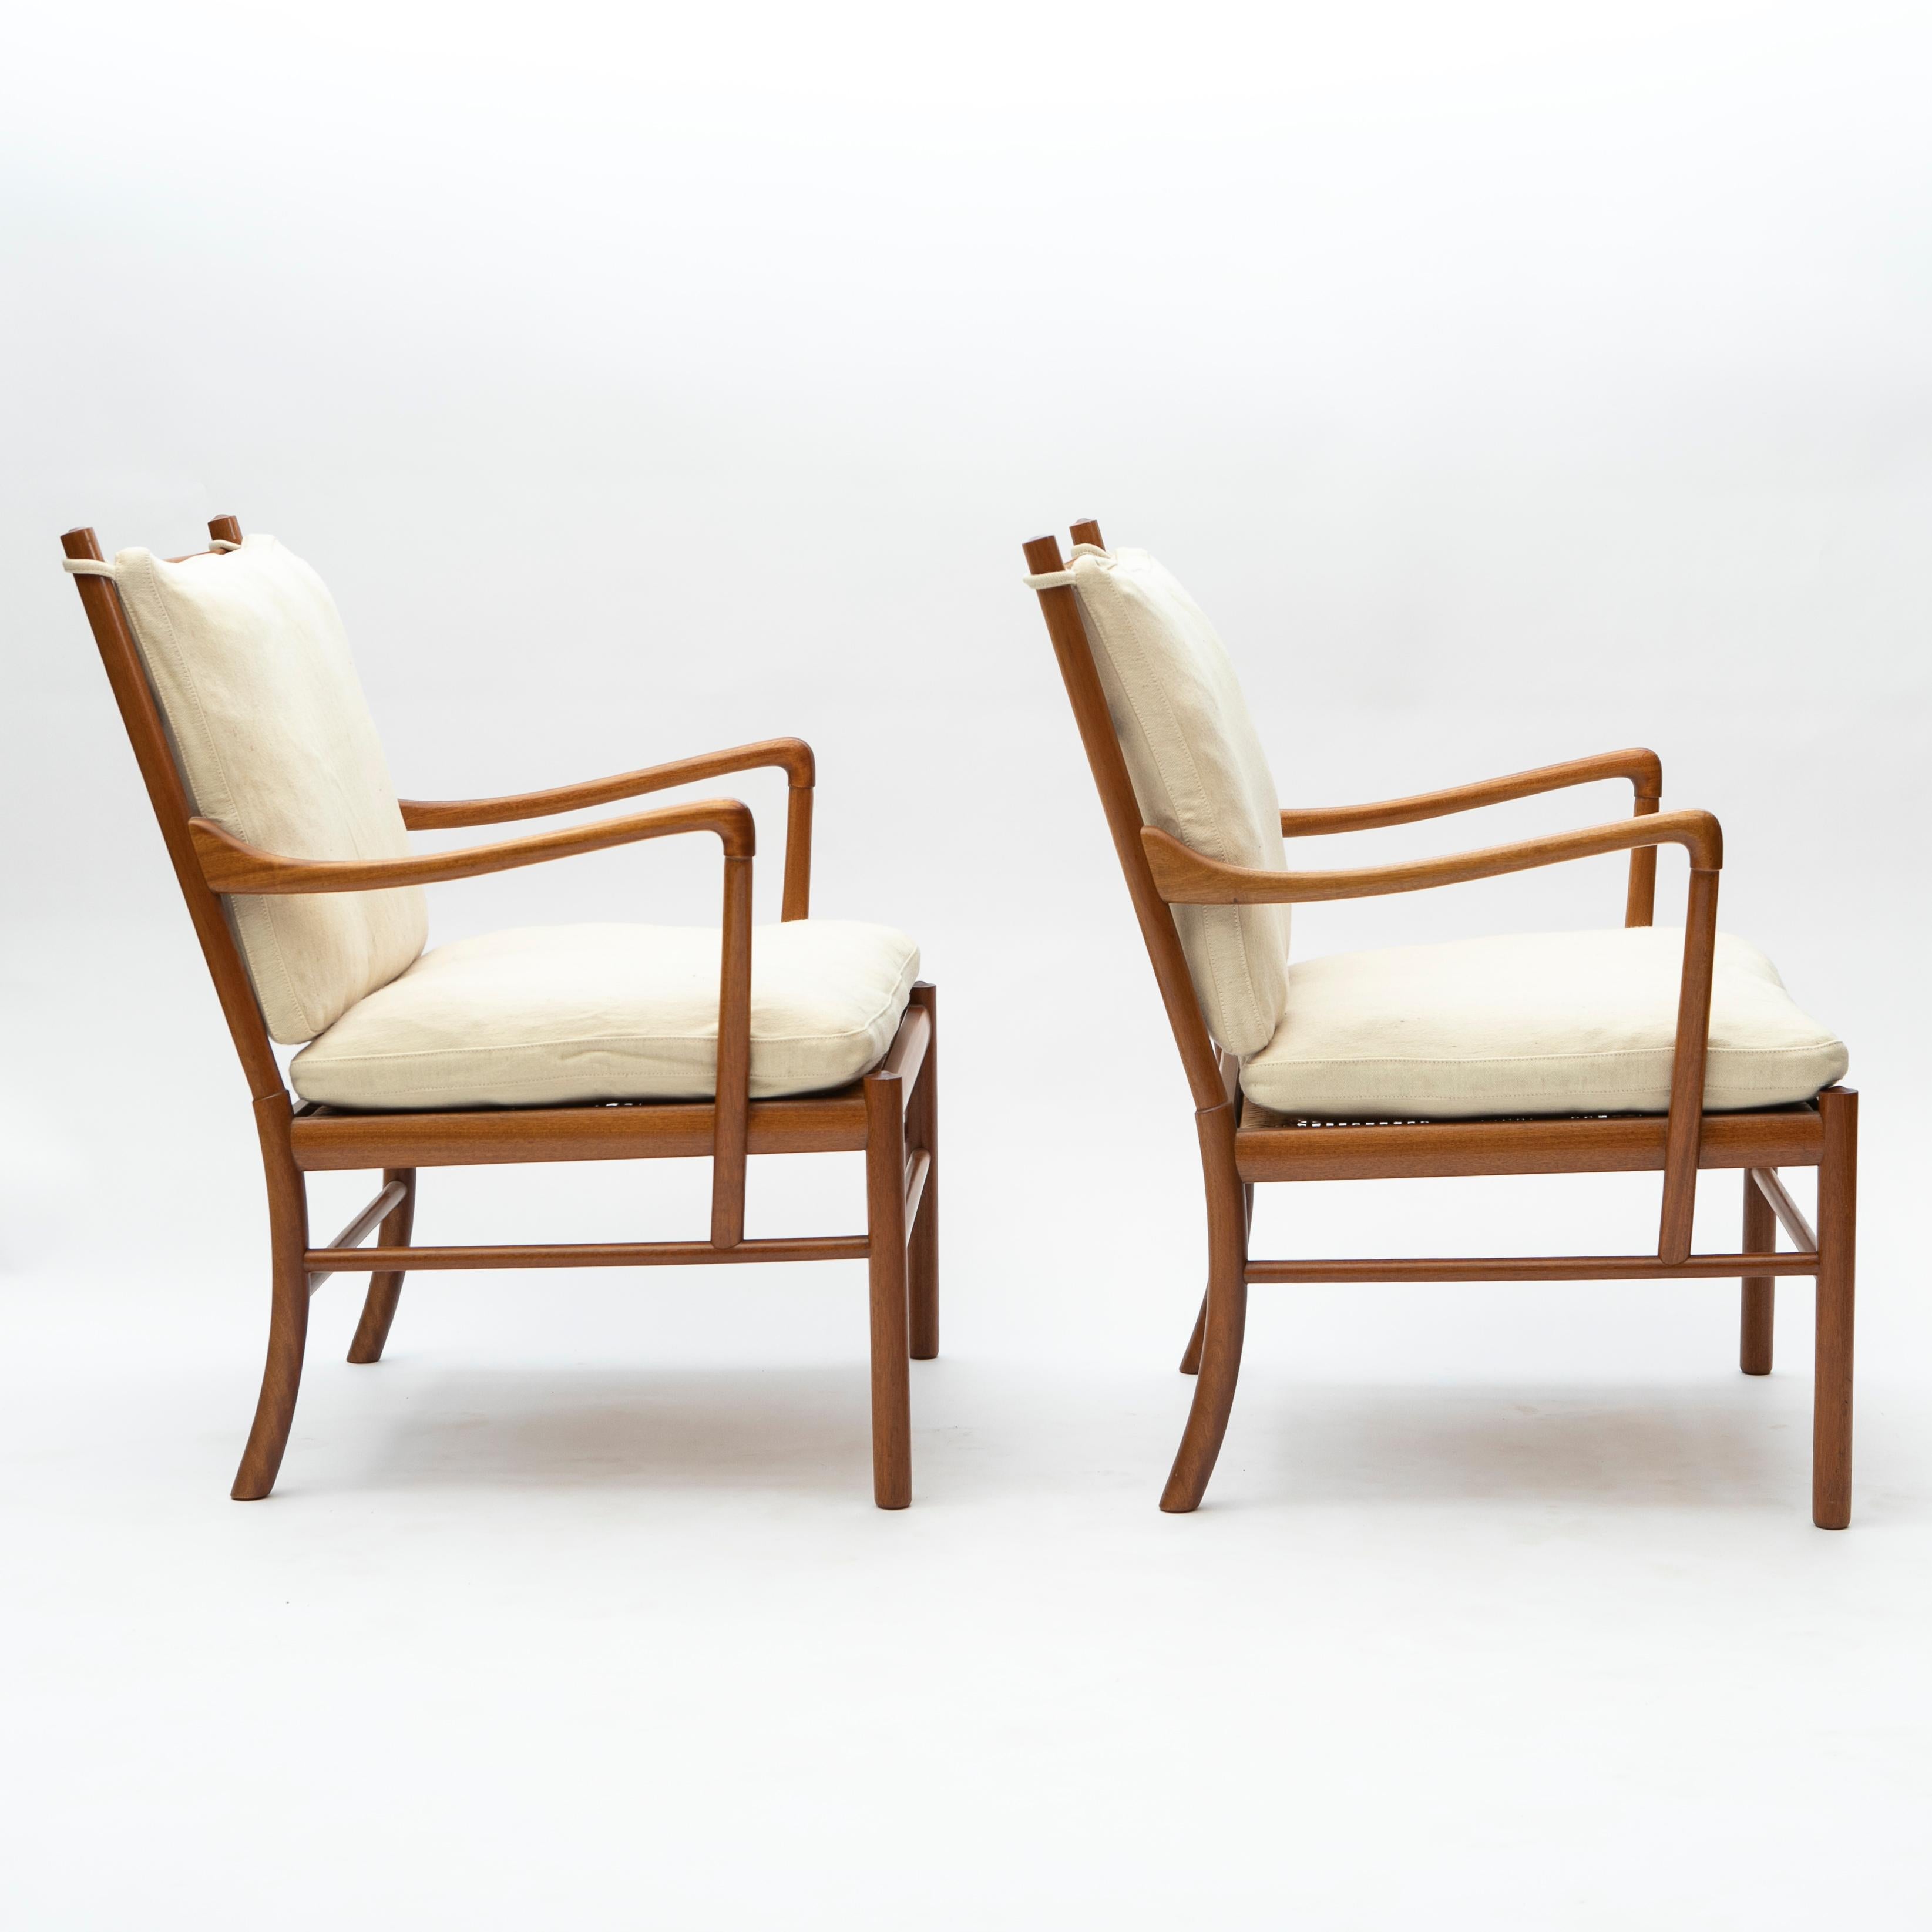 Ole Wanscher (Danish, 1903-1985).

Pair of Colonial Chairs designed by Ole Wanscher.
Crafted in solid mahogany with woven rattan cane seat and original cushions covered in light Greenland wool.

Produced by Poul Jeppesen in Denmark circa